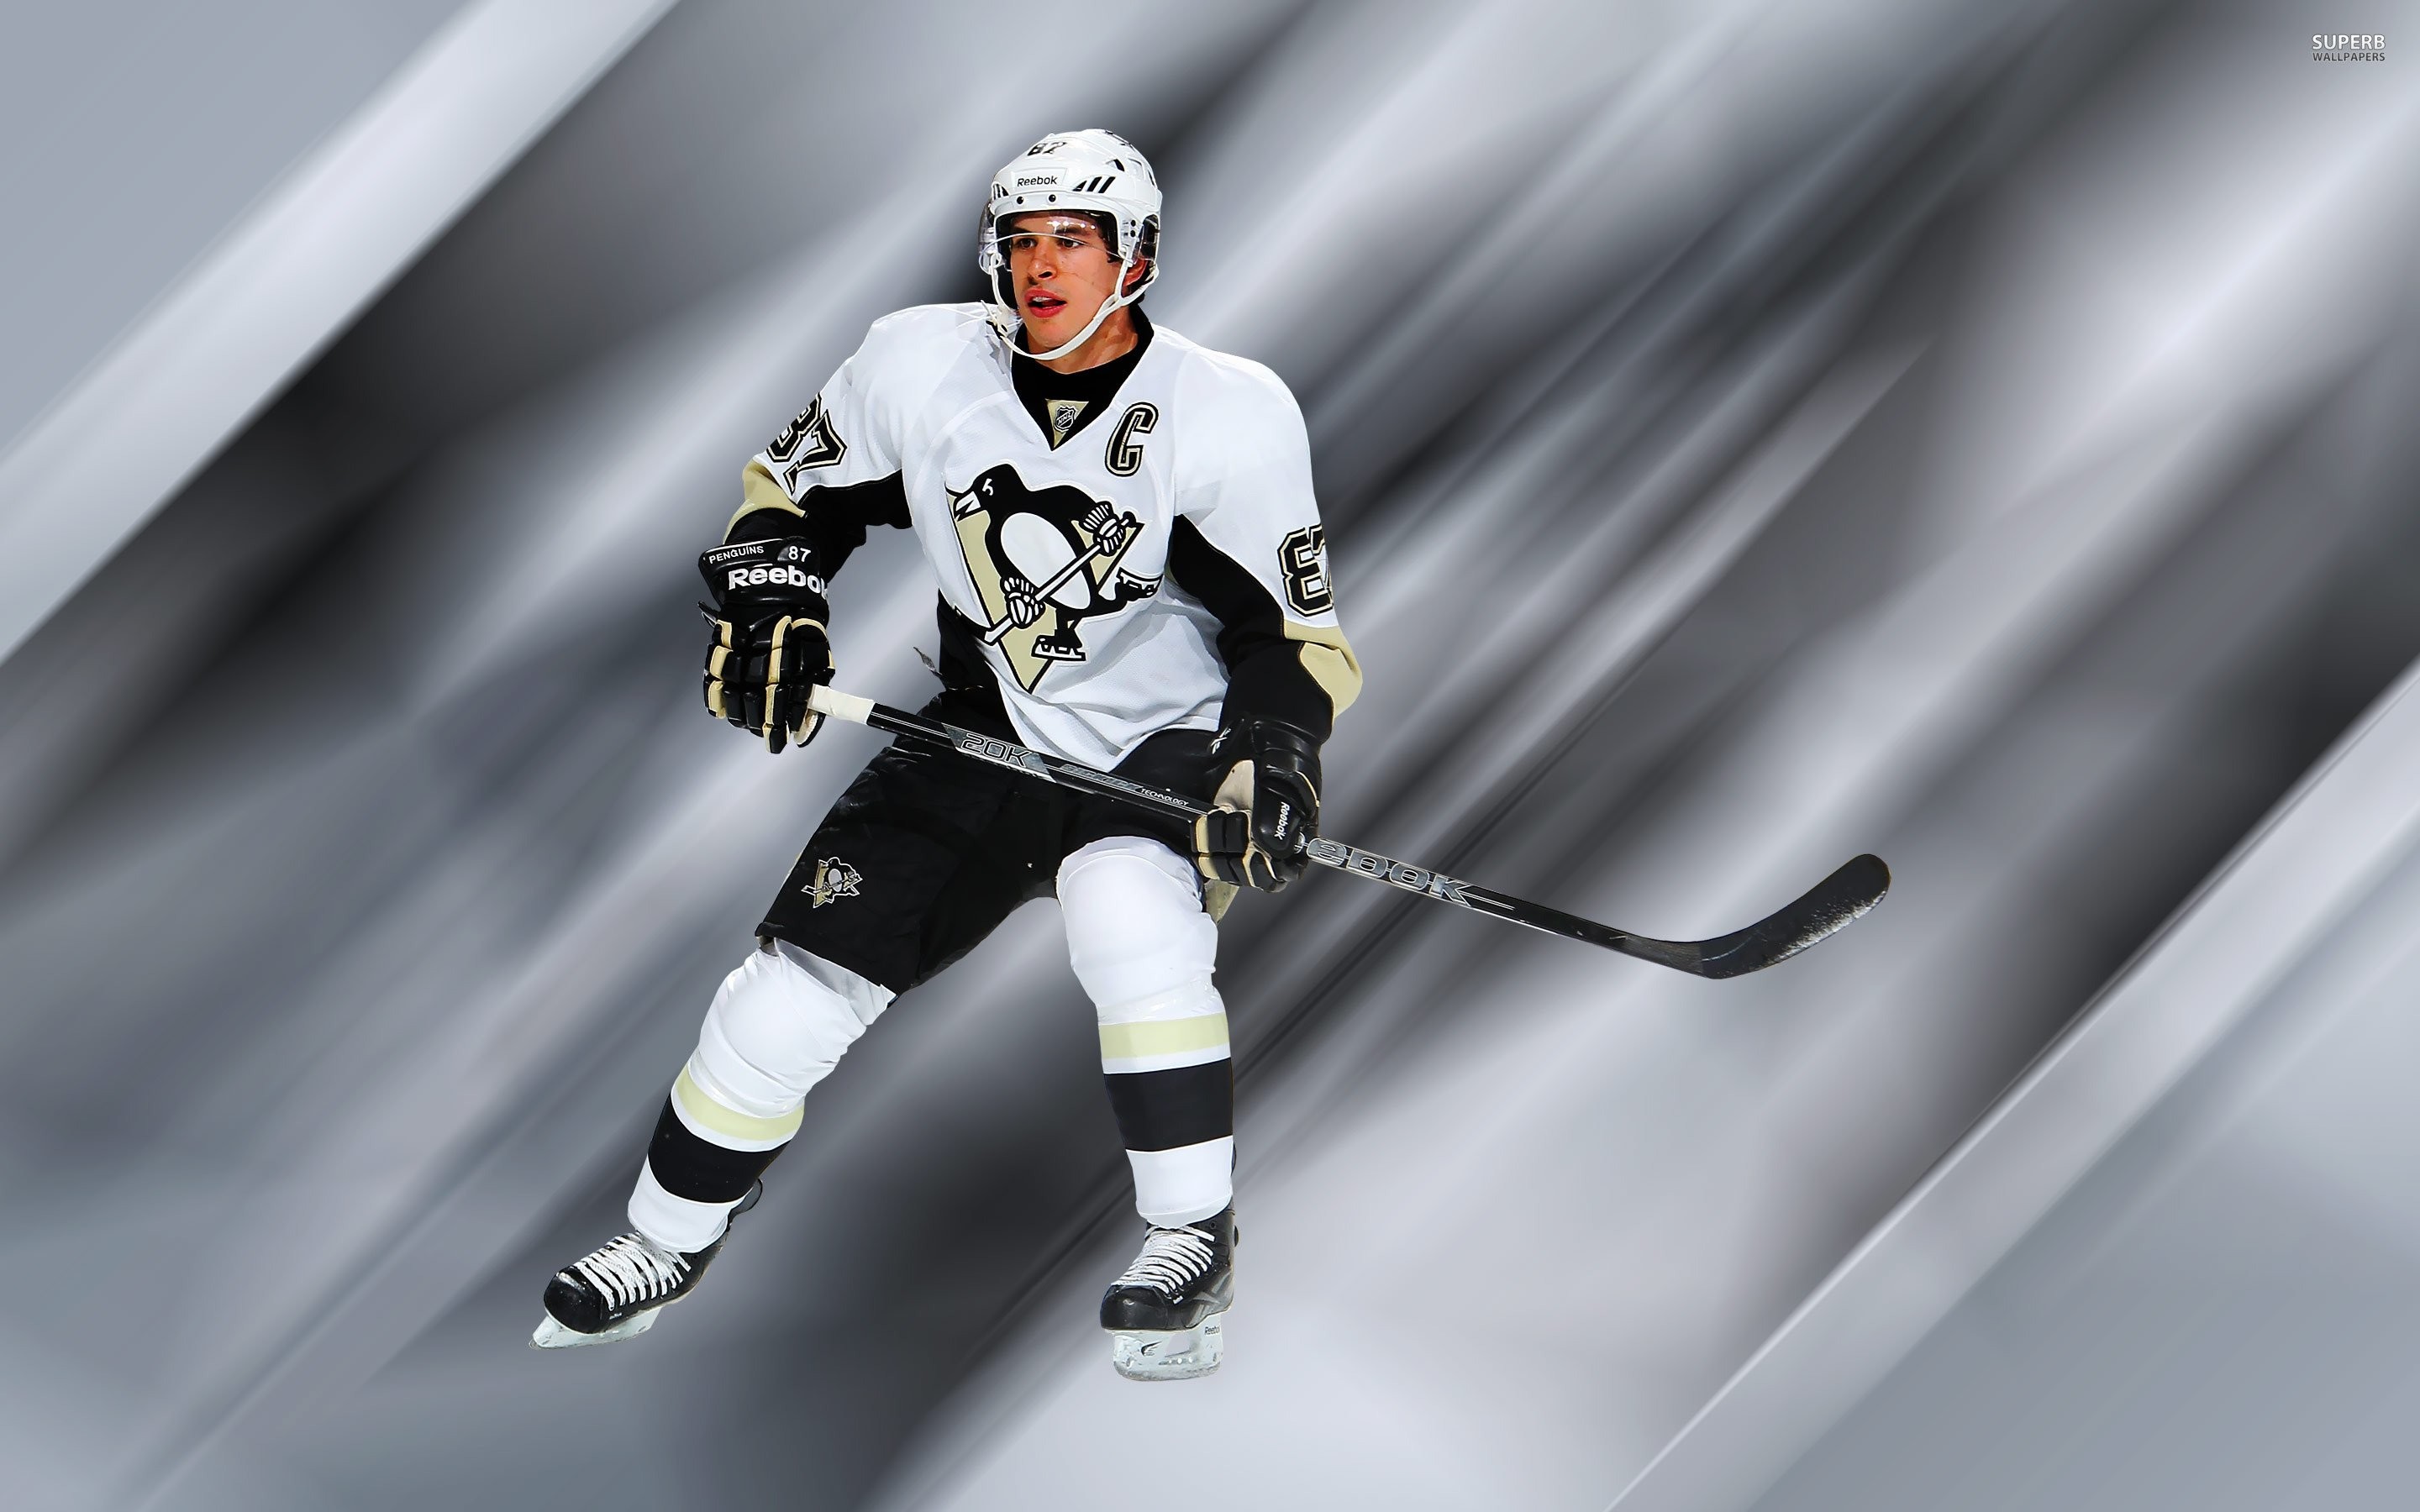 2880x1800 Sidney Crosby 499432. SHARE. TAGS: Pittsburgh Penguins NHL Hockey